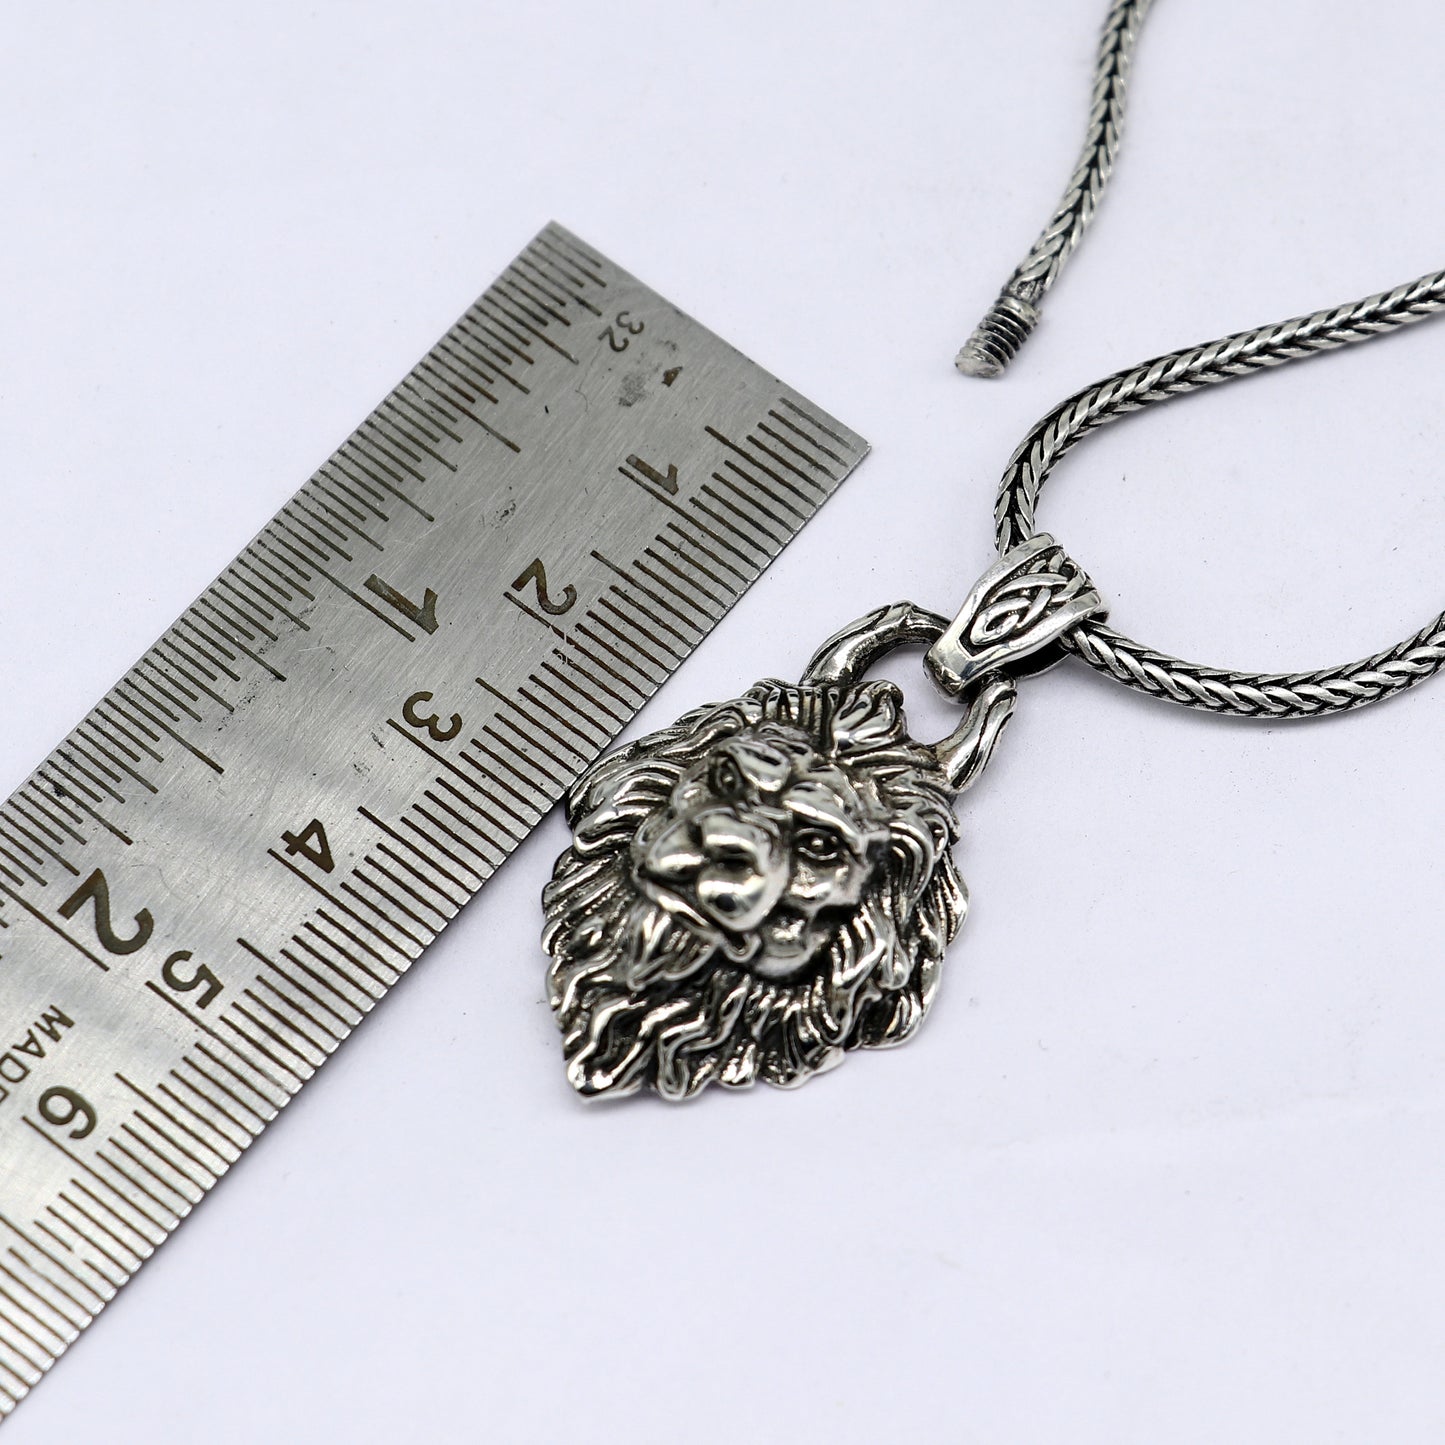 925 pure silver LION FACE pendant best gifting pendant, wheat chain necklace locket best gifting jewelry NSP729 - TRIBAL ORNAMENTS